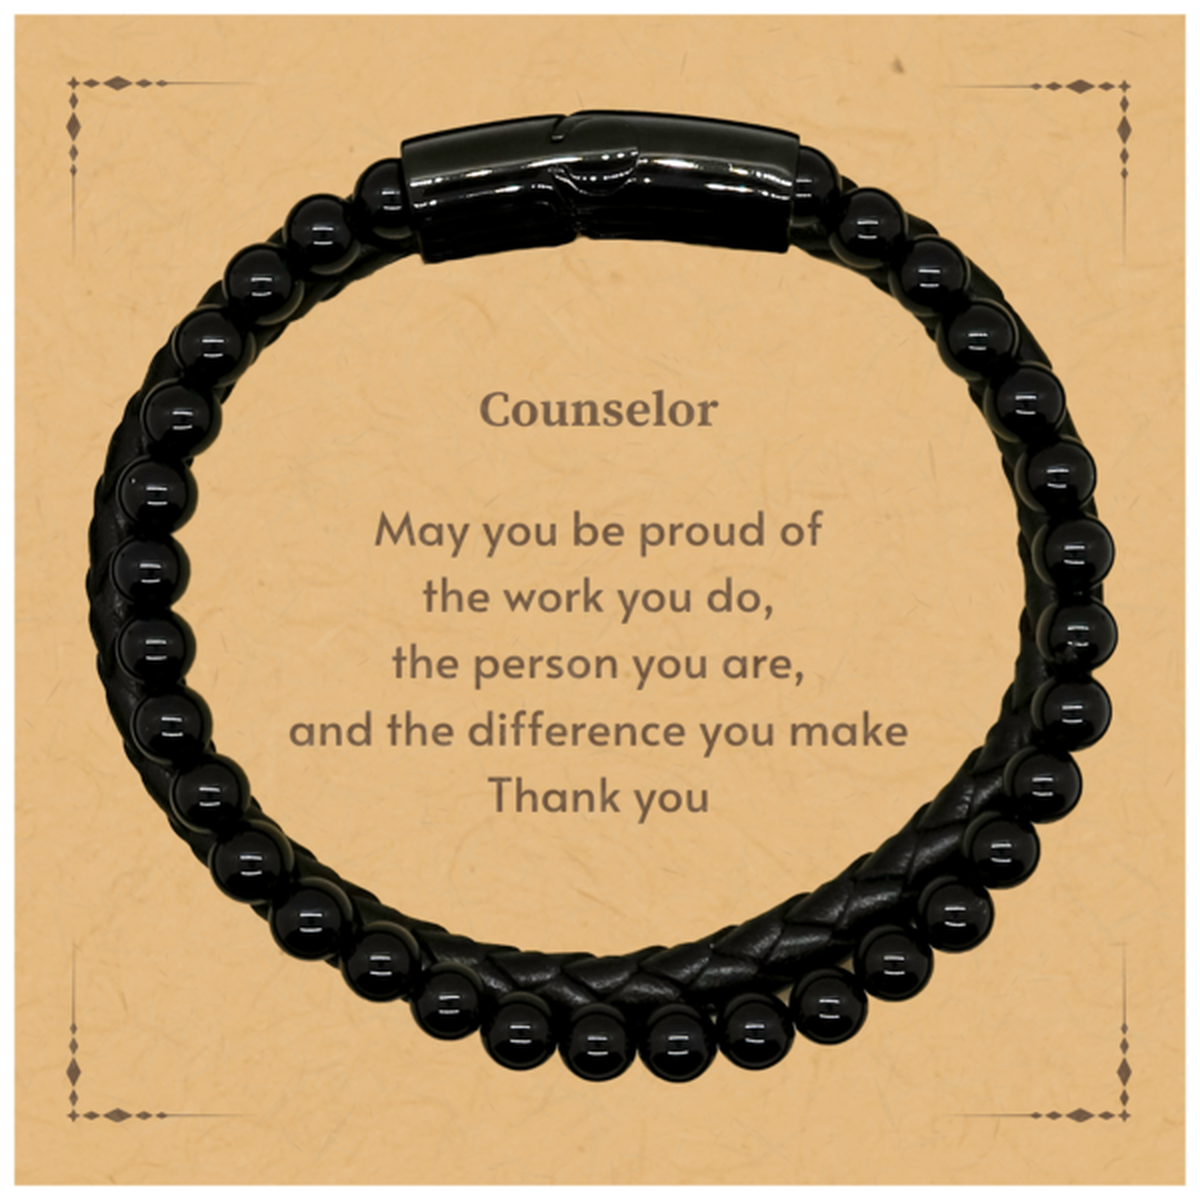 Heartwarming Stone Leather Bracelets Retirement Coworkers Gifts for Counselor, Counselor May You be proud of the work you do, the person you are Gifts for Boss Men Women Friends